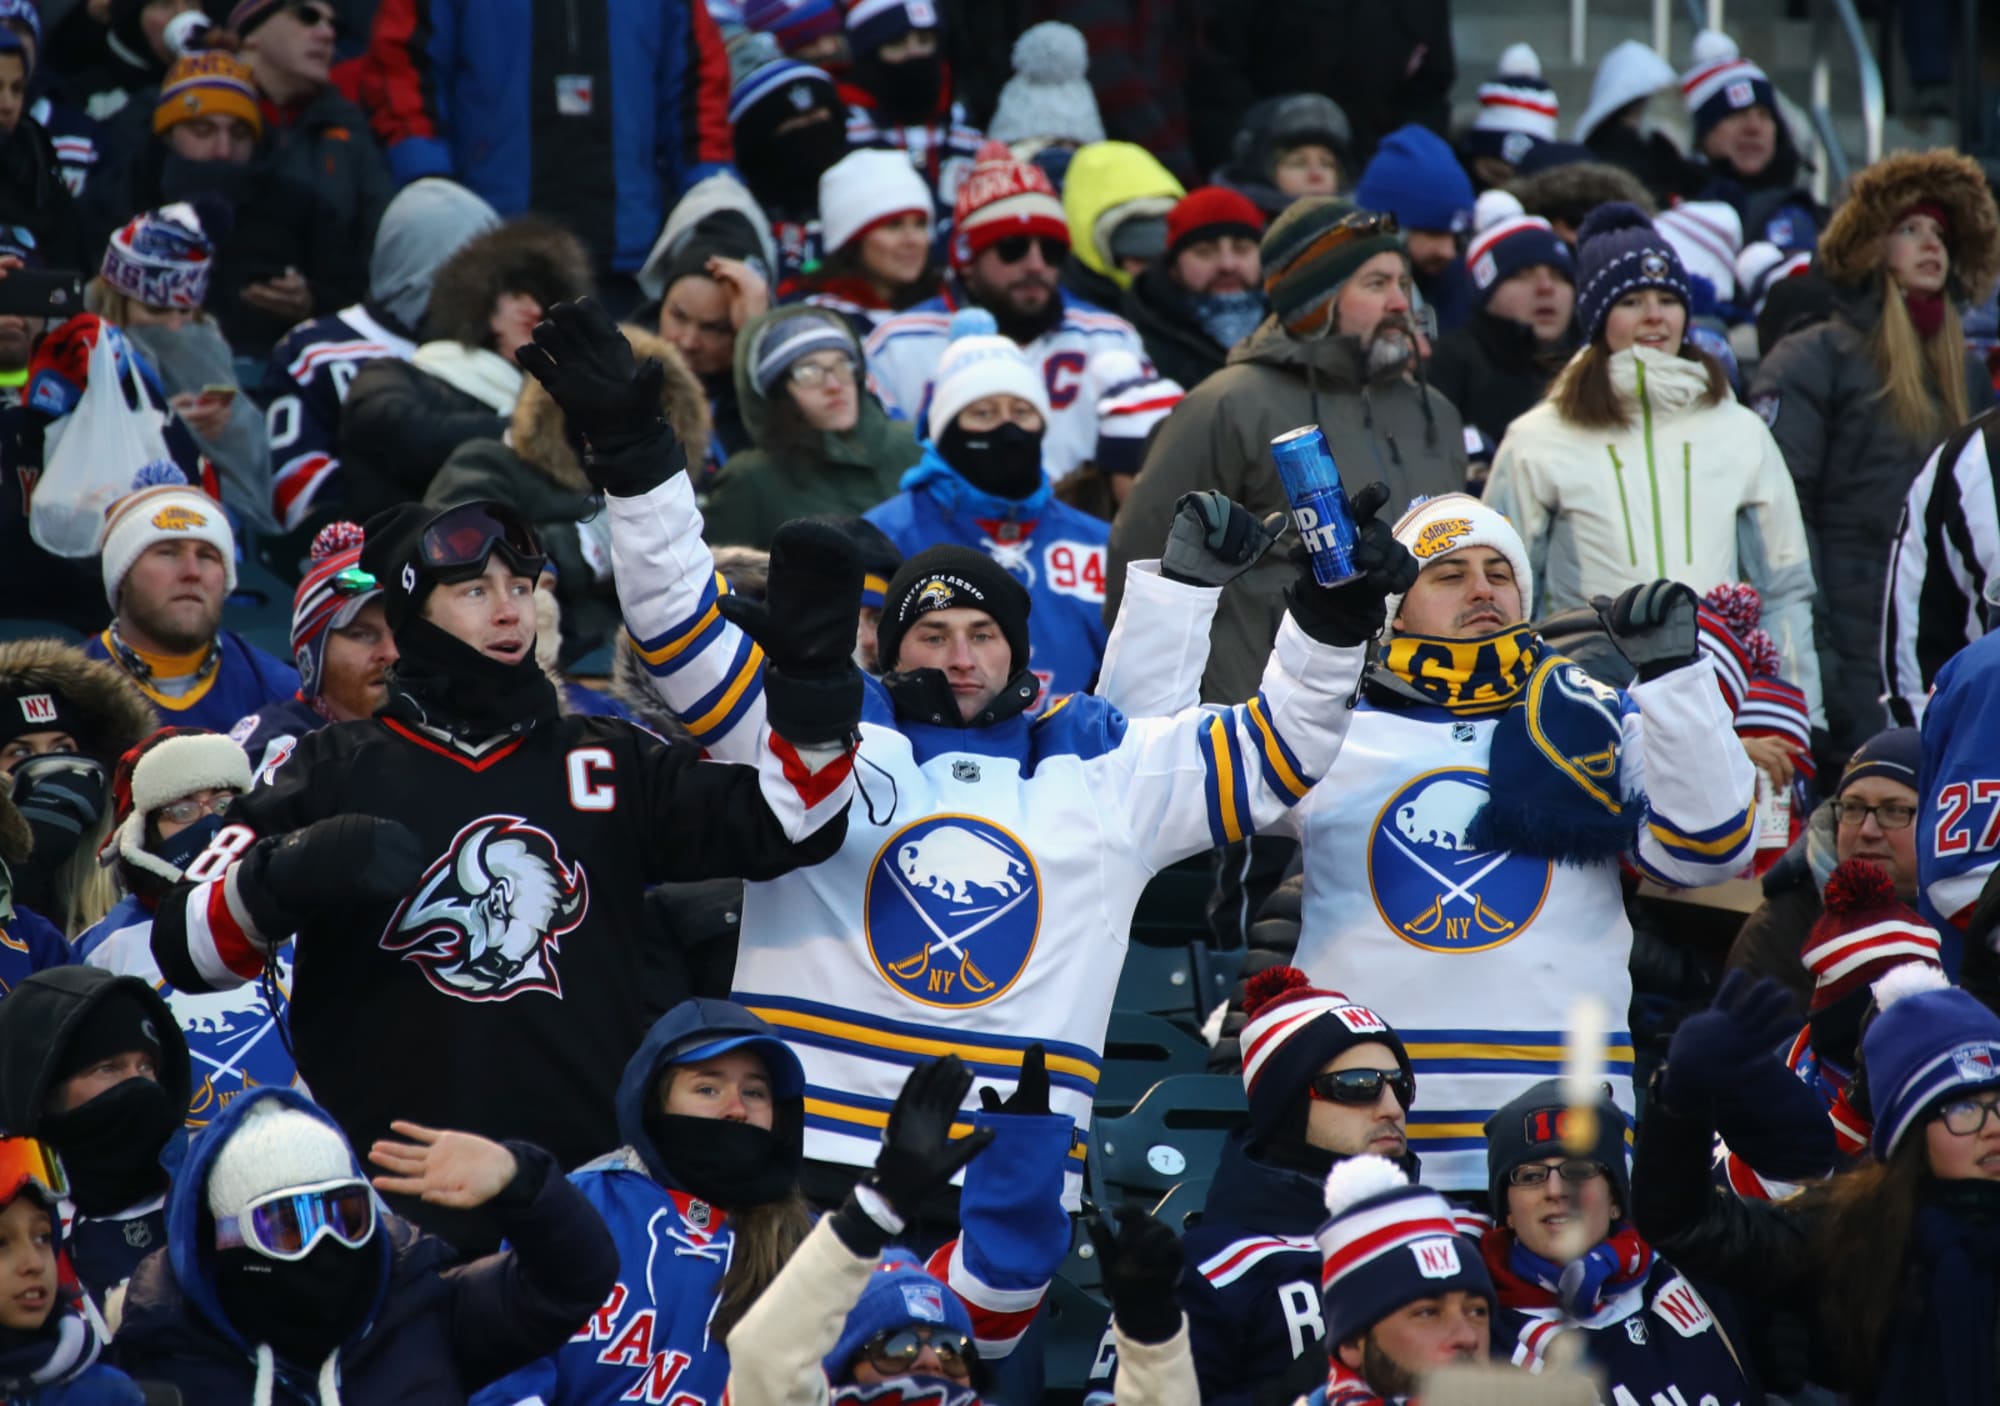 Fans (and a longtime Sabres beat writer) suggest how to upgrade